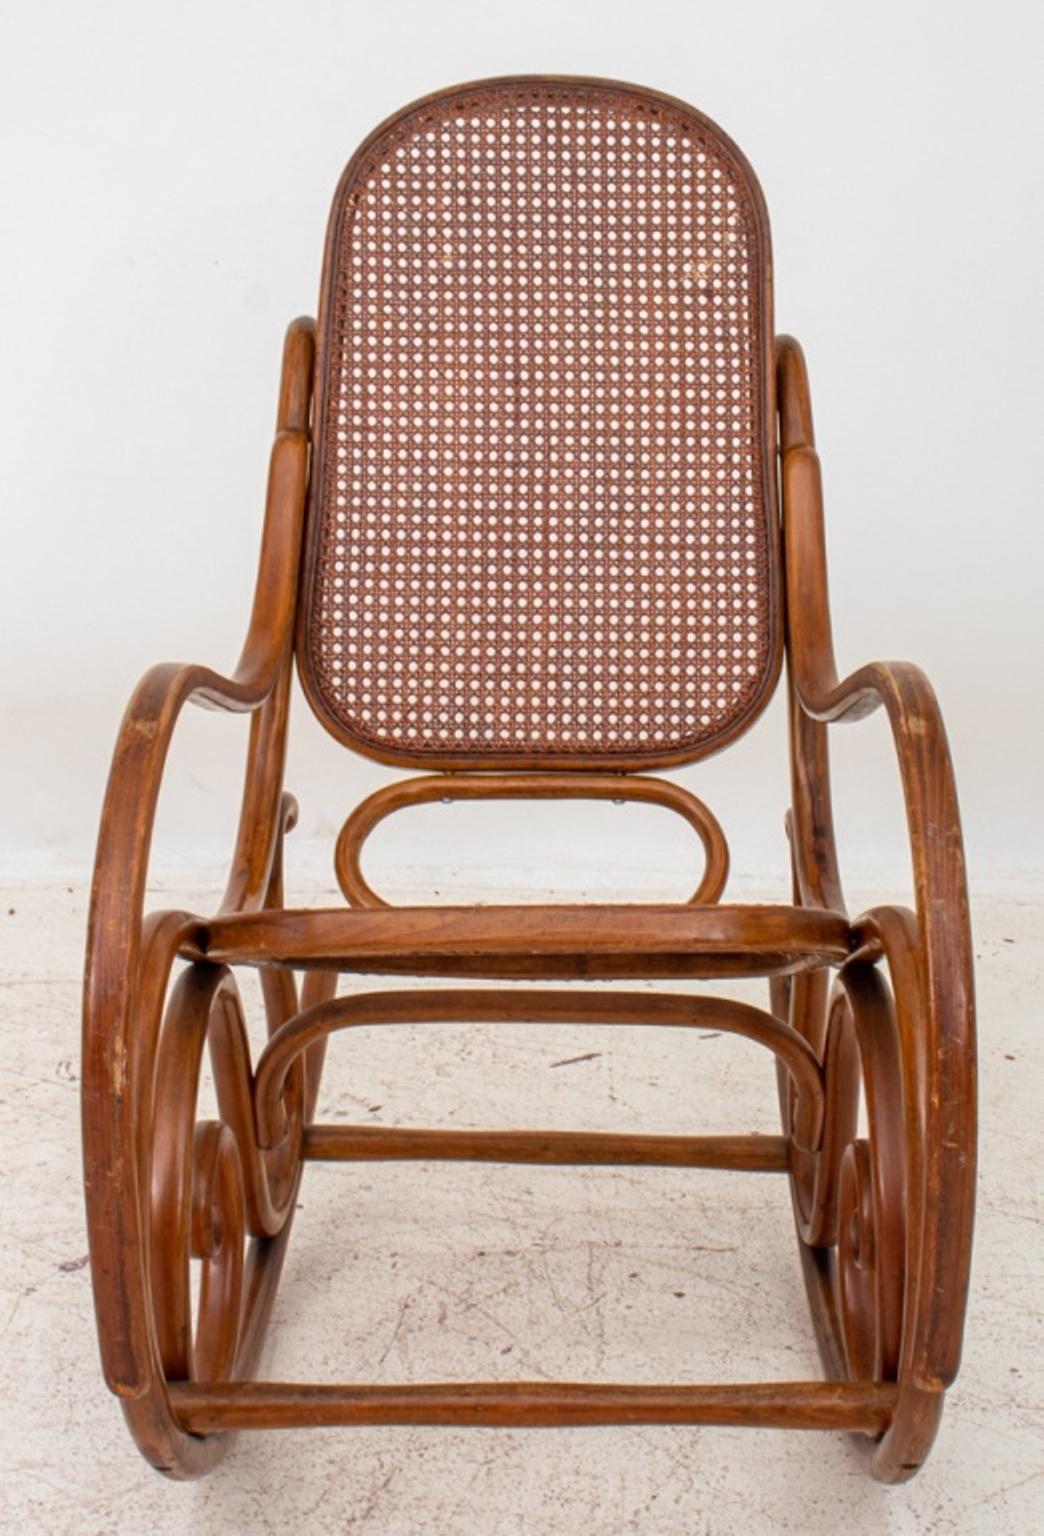 Vintage Thonet Bentwood and caned rocking chair, Model No. 21, with oval back and seat conjoined by scrolling bentwood elements. 44